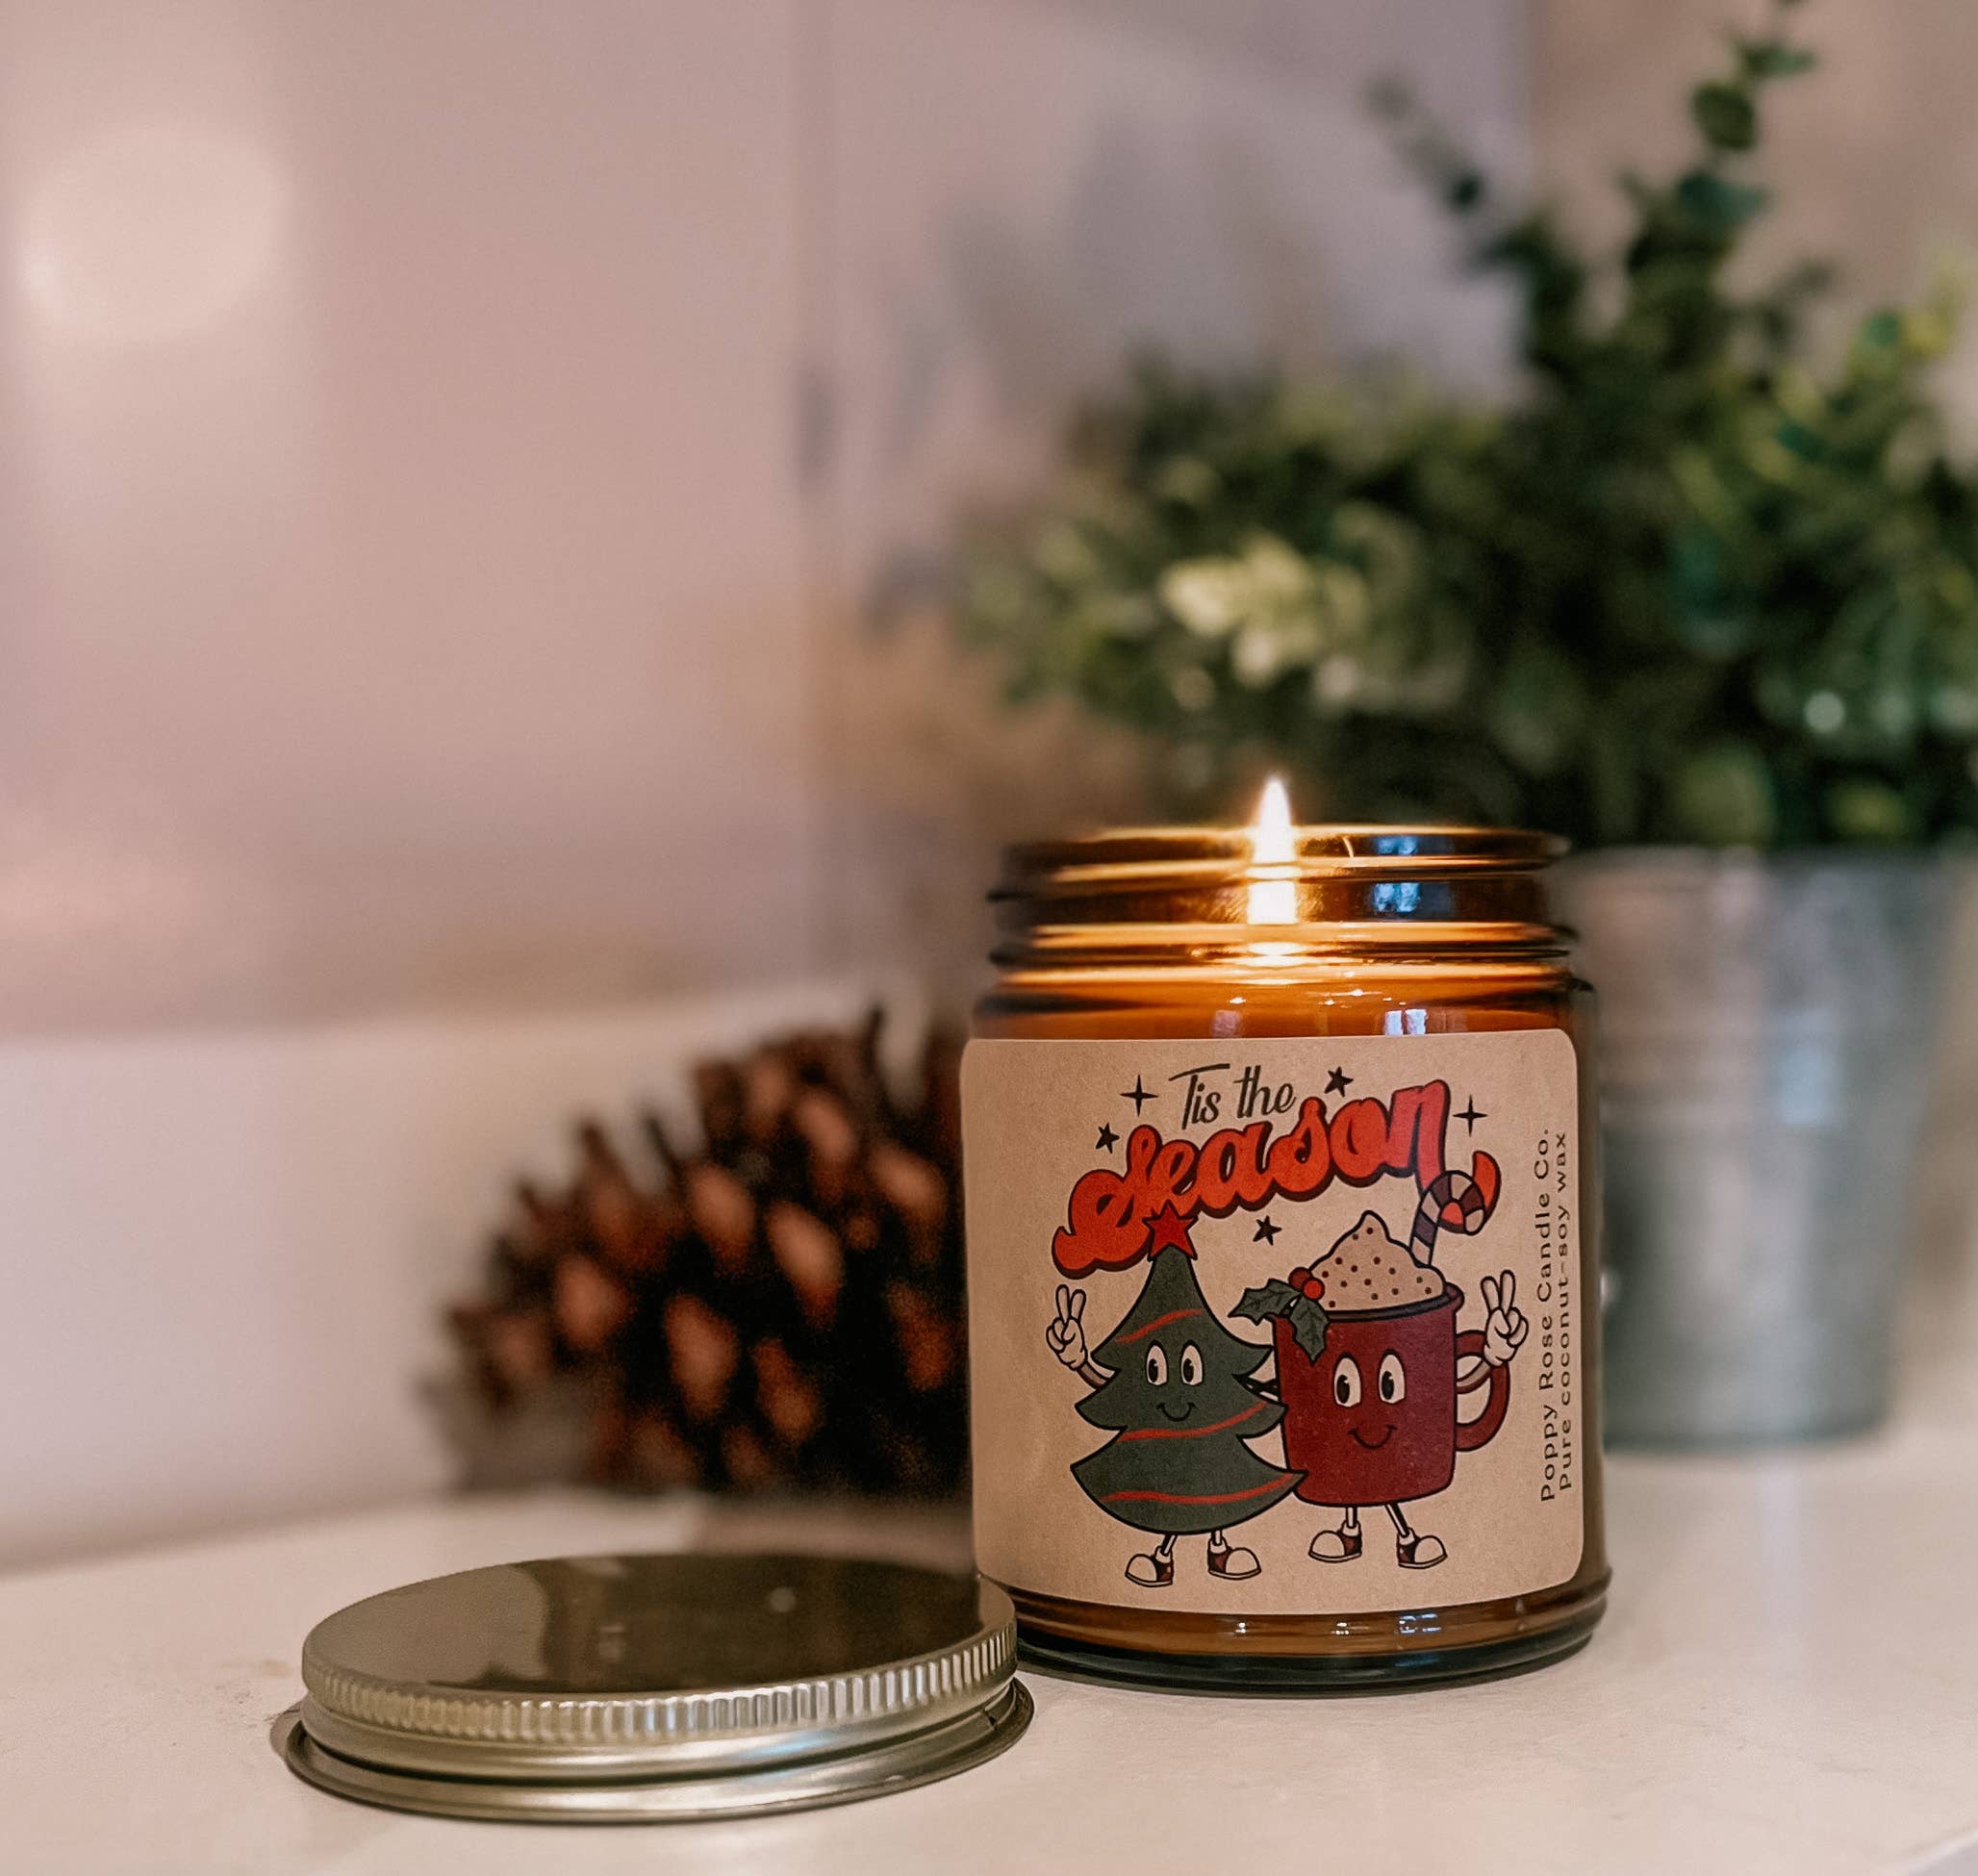 Poppy Rose Candle Co. - Tis The Season - Christmas holiday winter candle